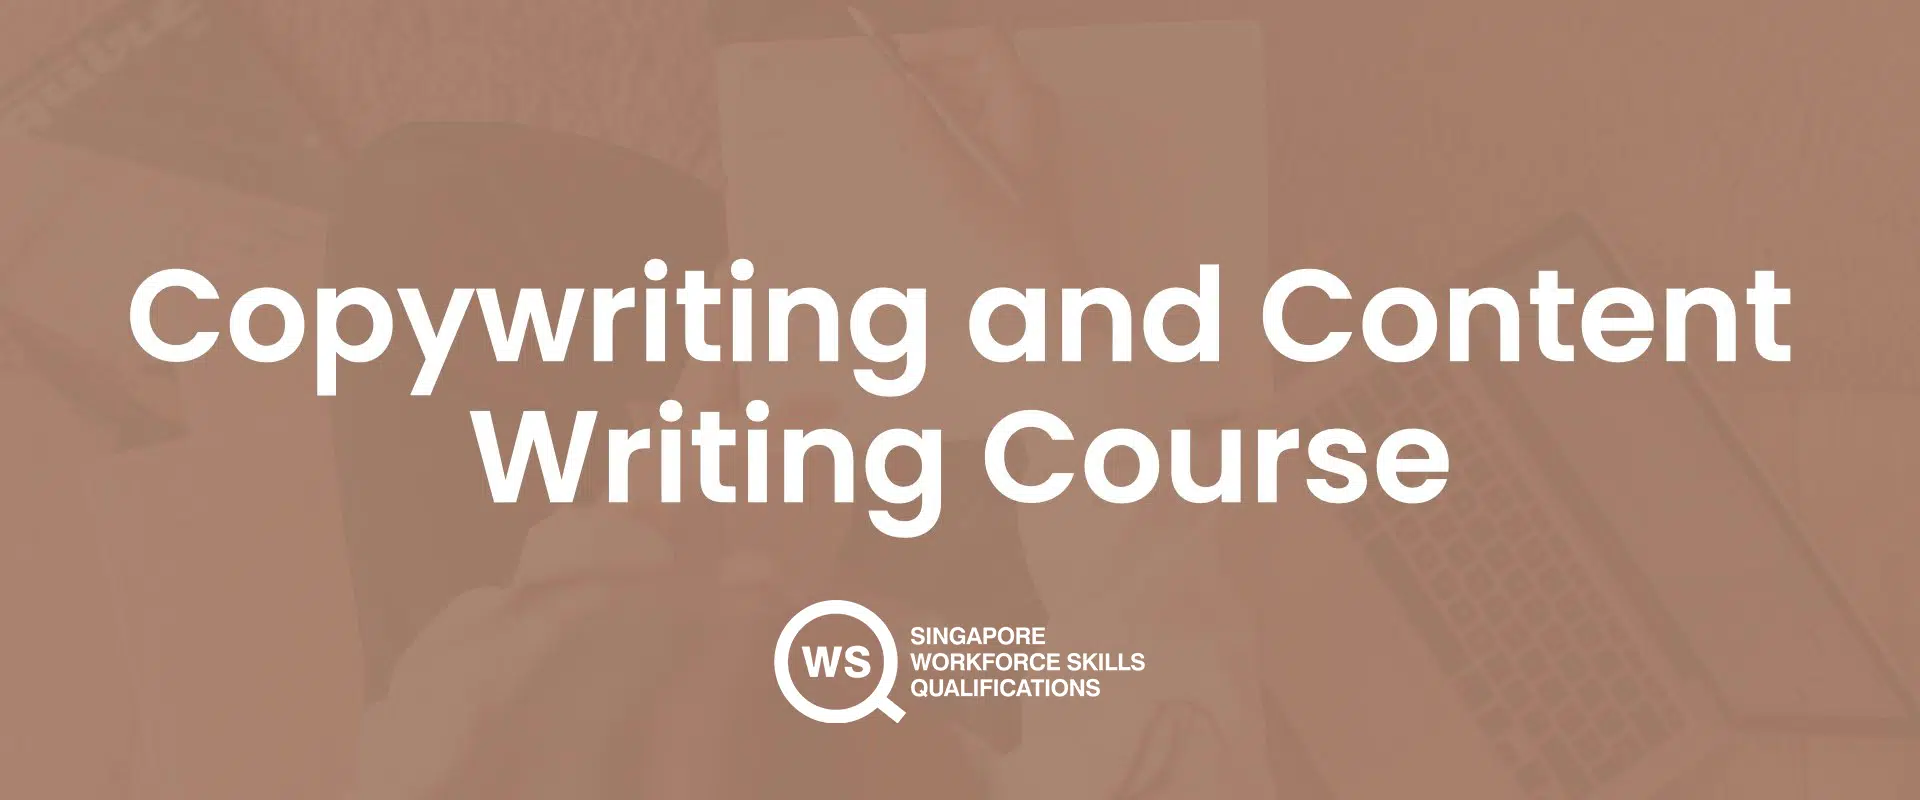 Copywriting and content writing course cover